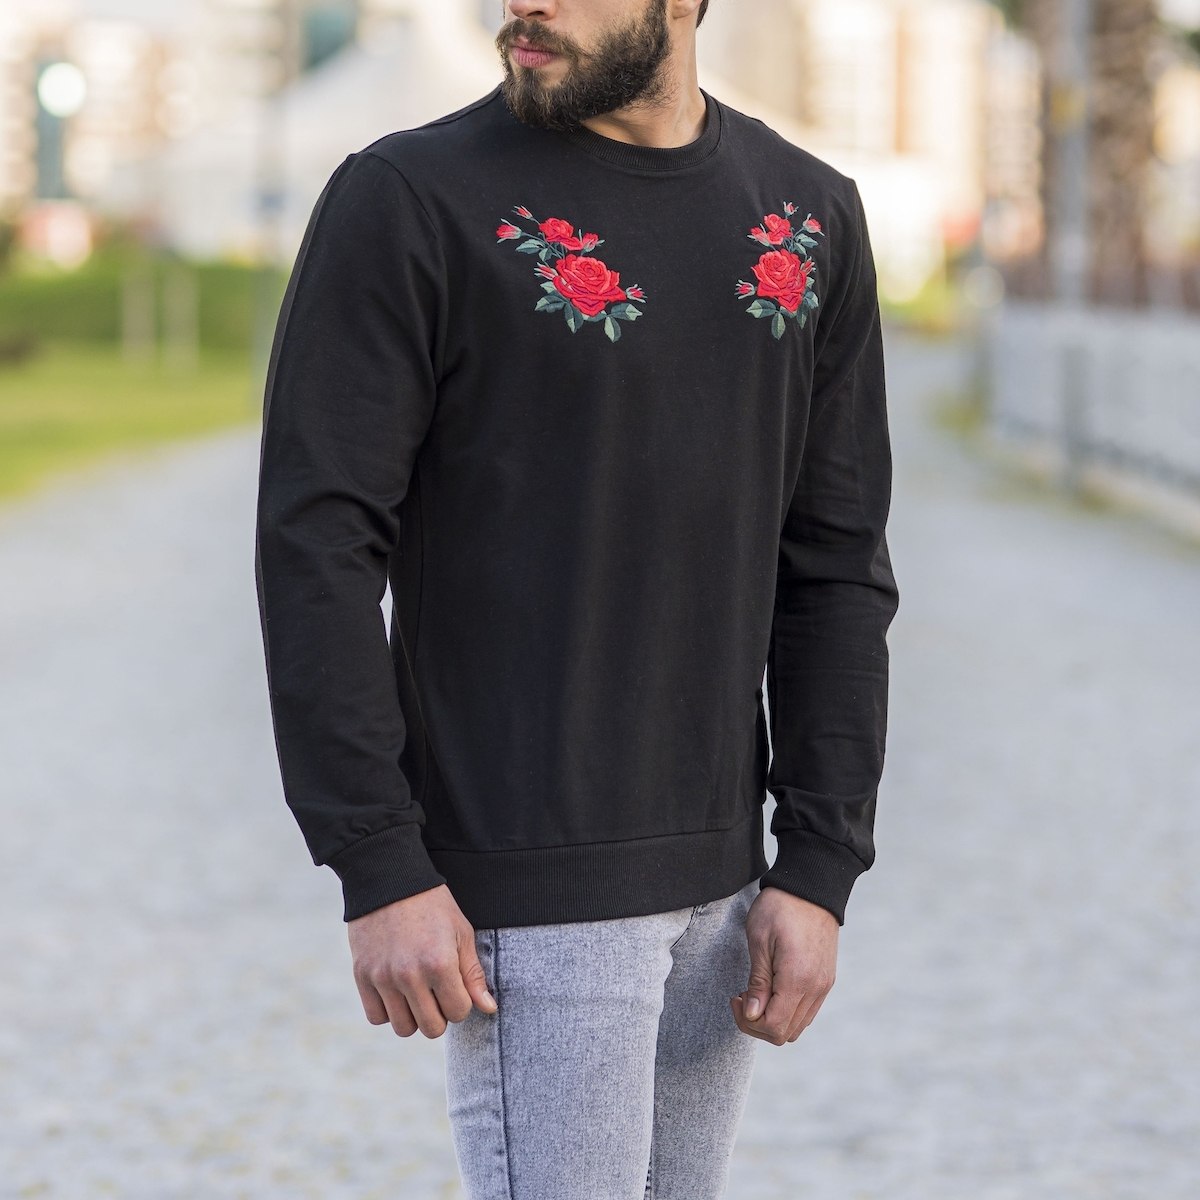 Black Sweatshirt With Rose Details On Arms - 2